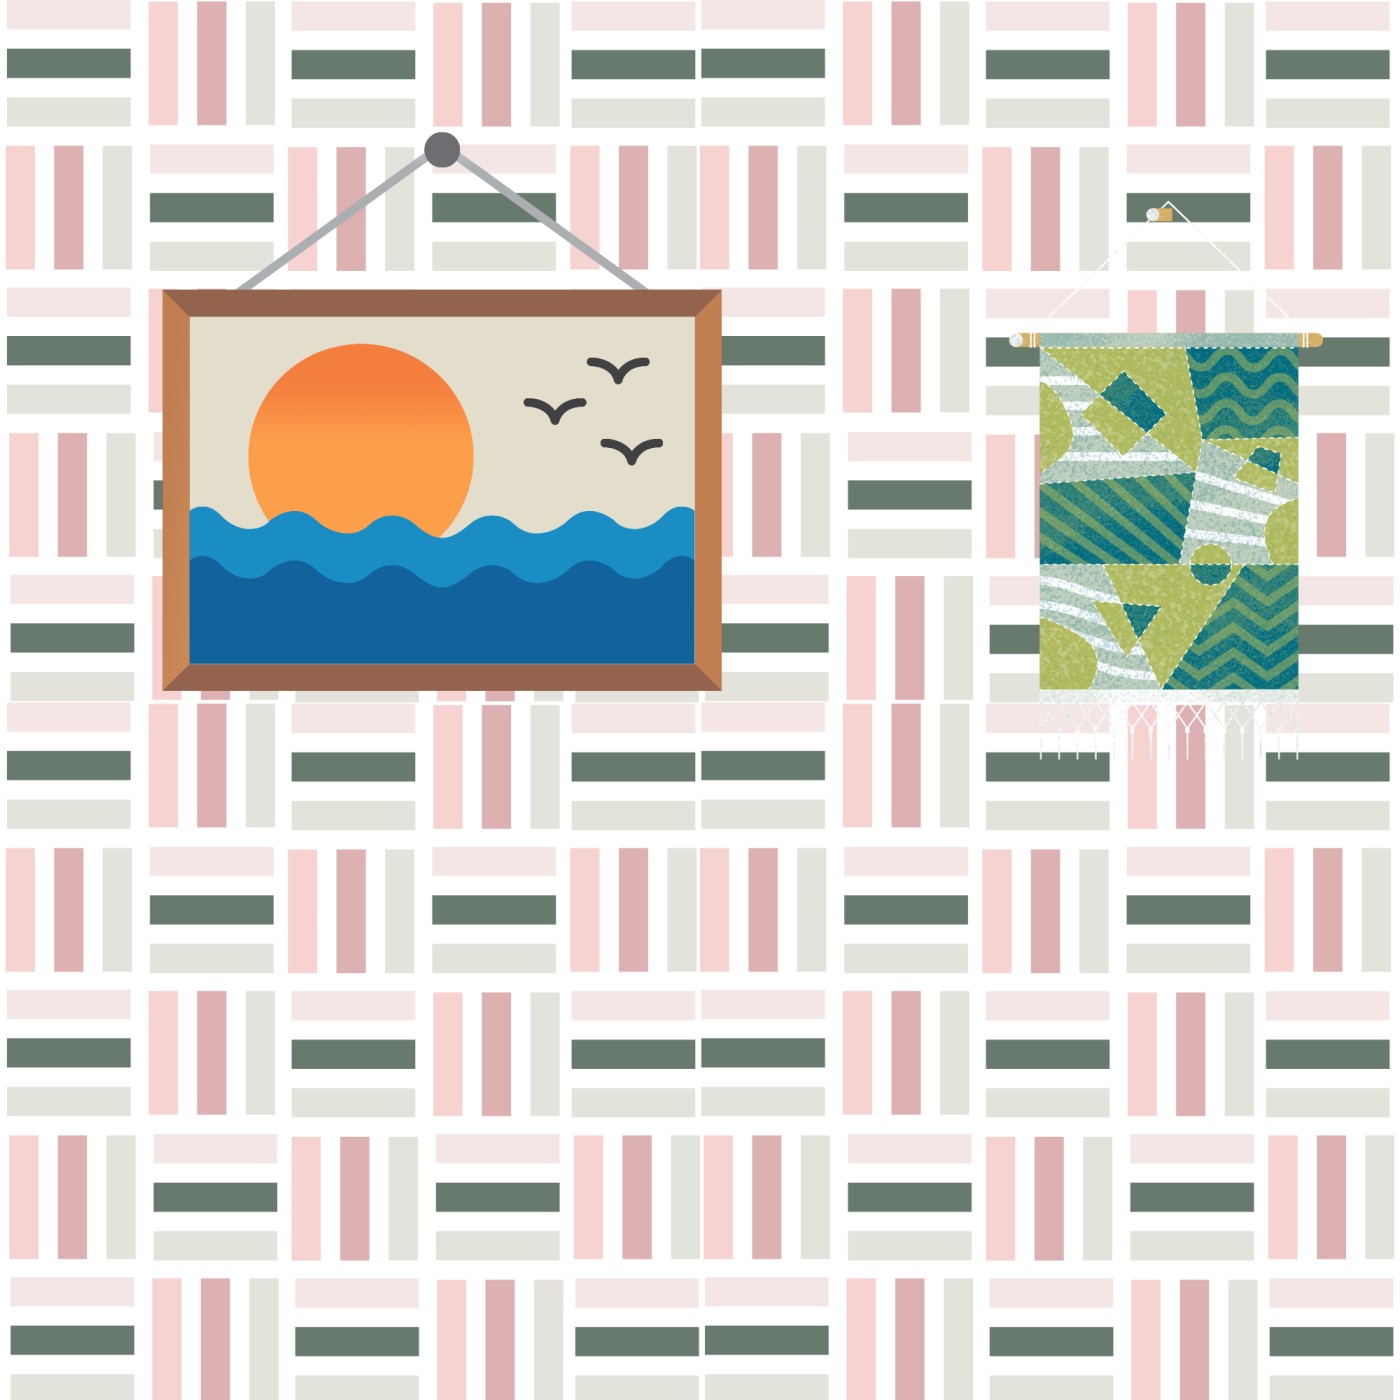 "Seamless Patterns: Elevate Your Designs with Endless Possibilities" preview image.